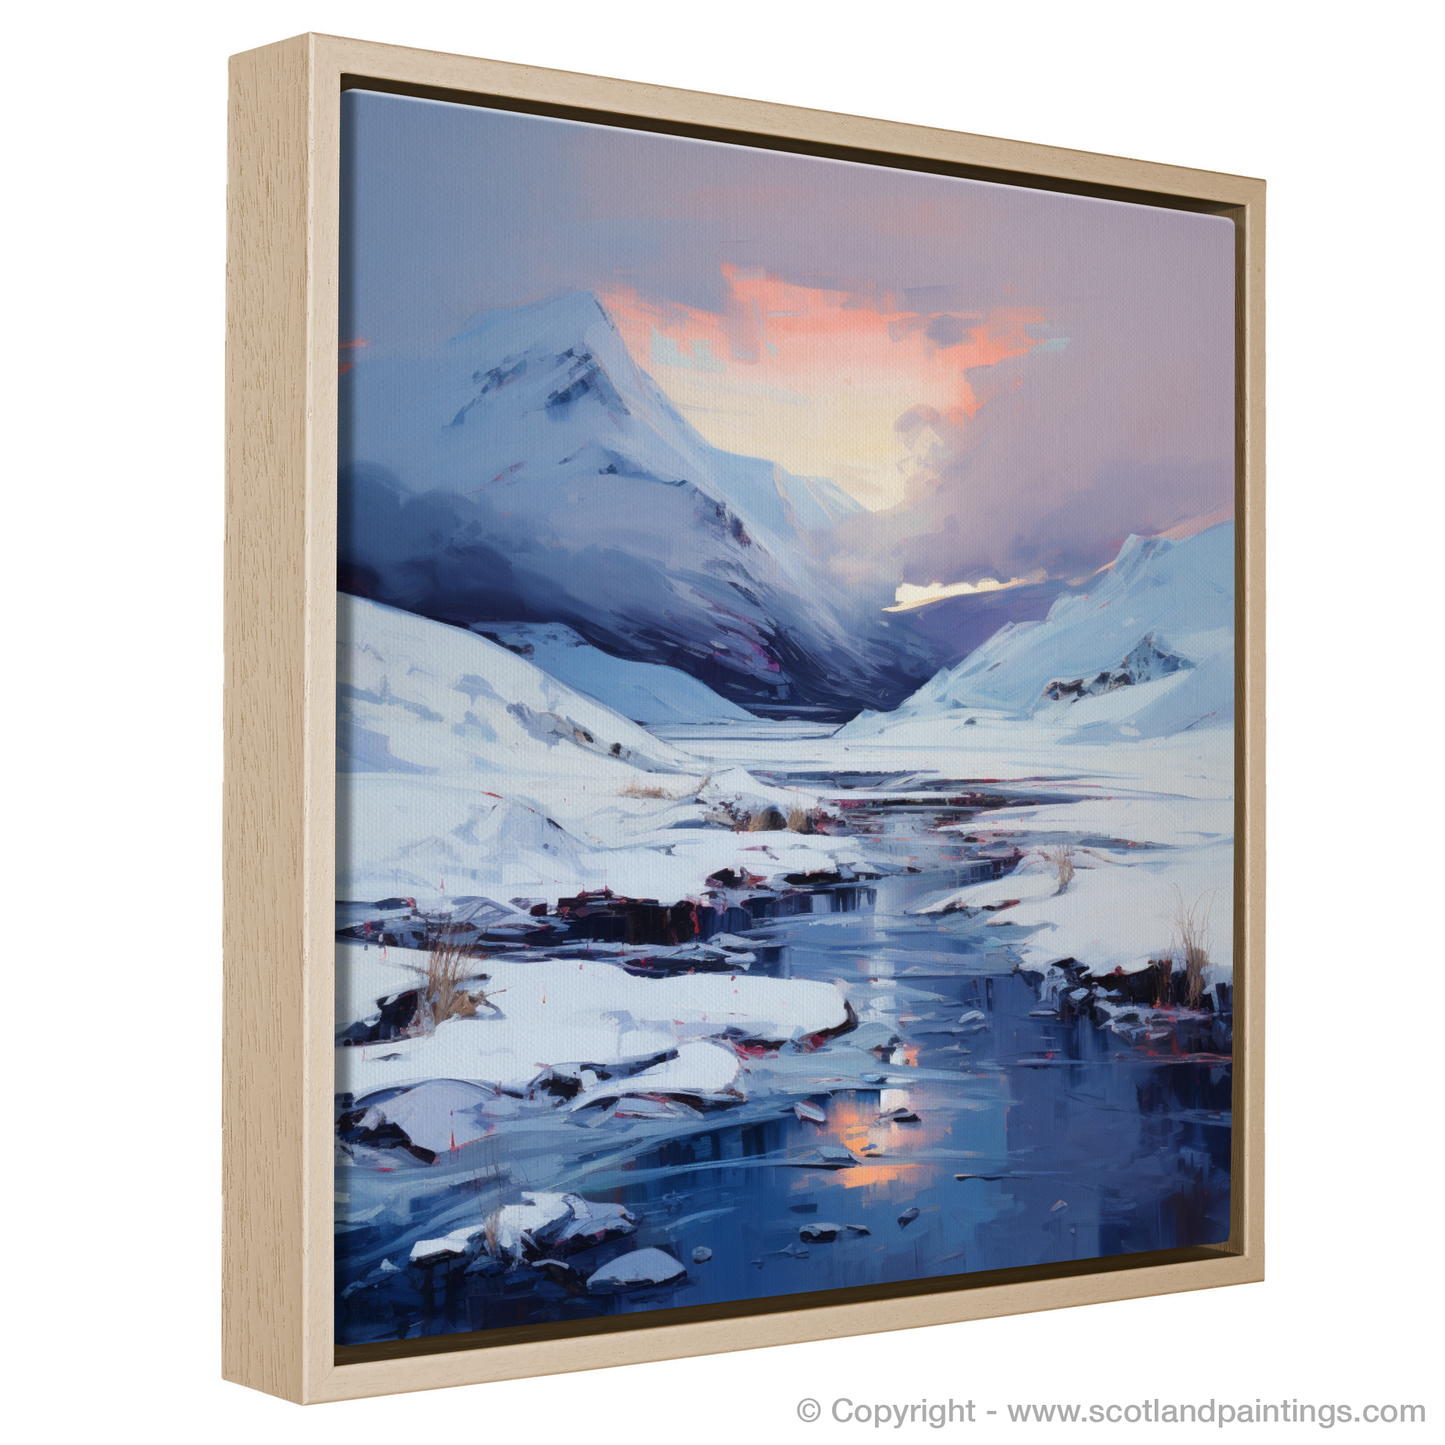 Painting and Art Print of Pristine snow at dusk in Glencoe entitled "Dusk's Embrace over Snowy Glencoe".